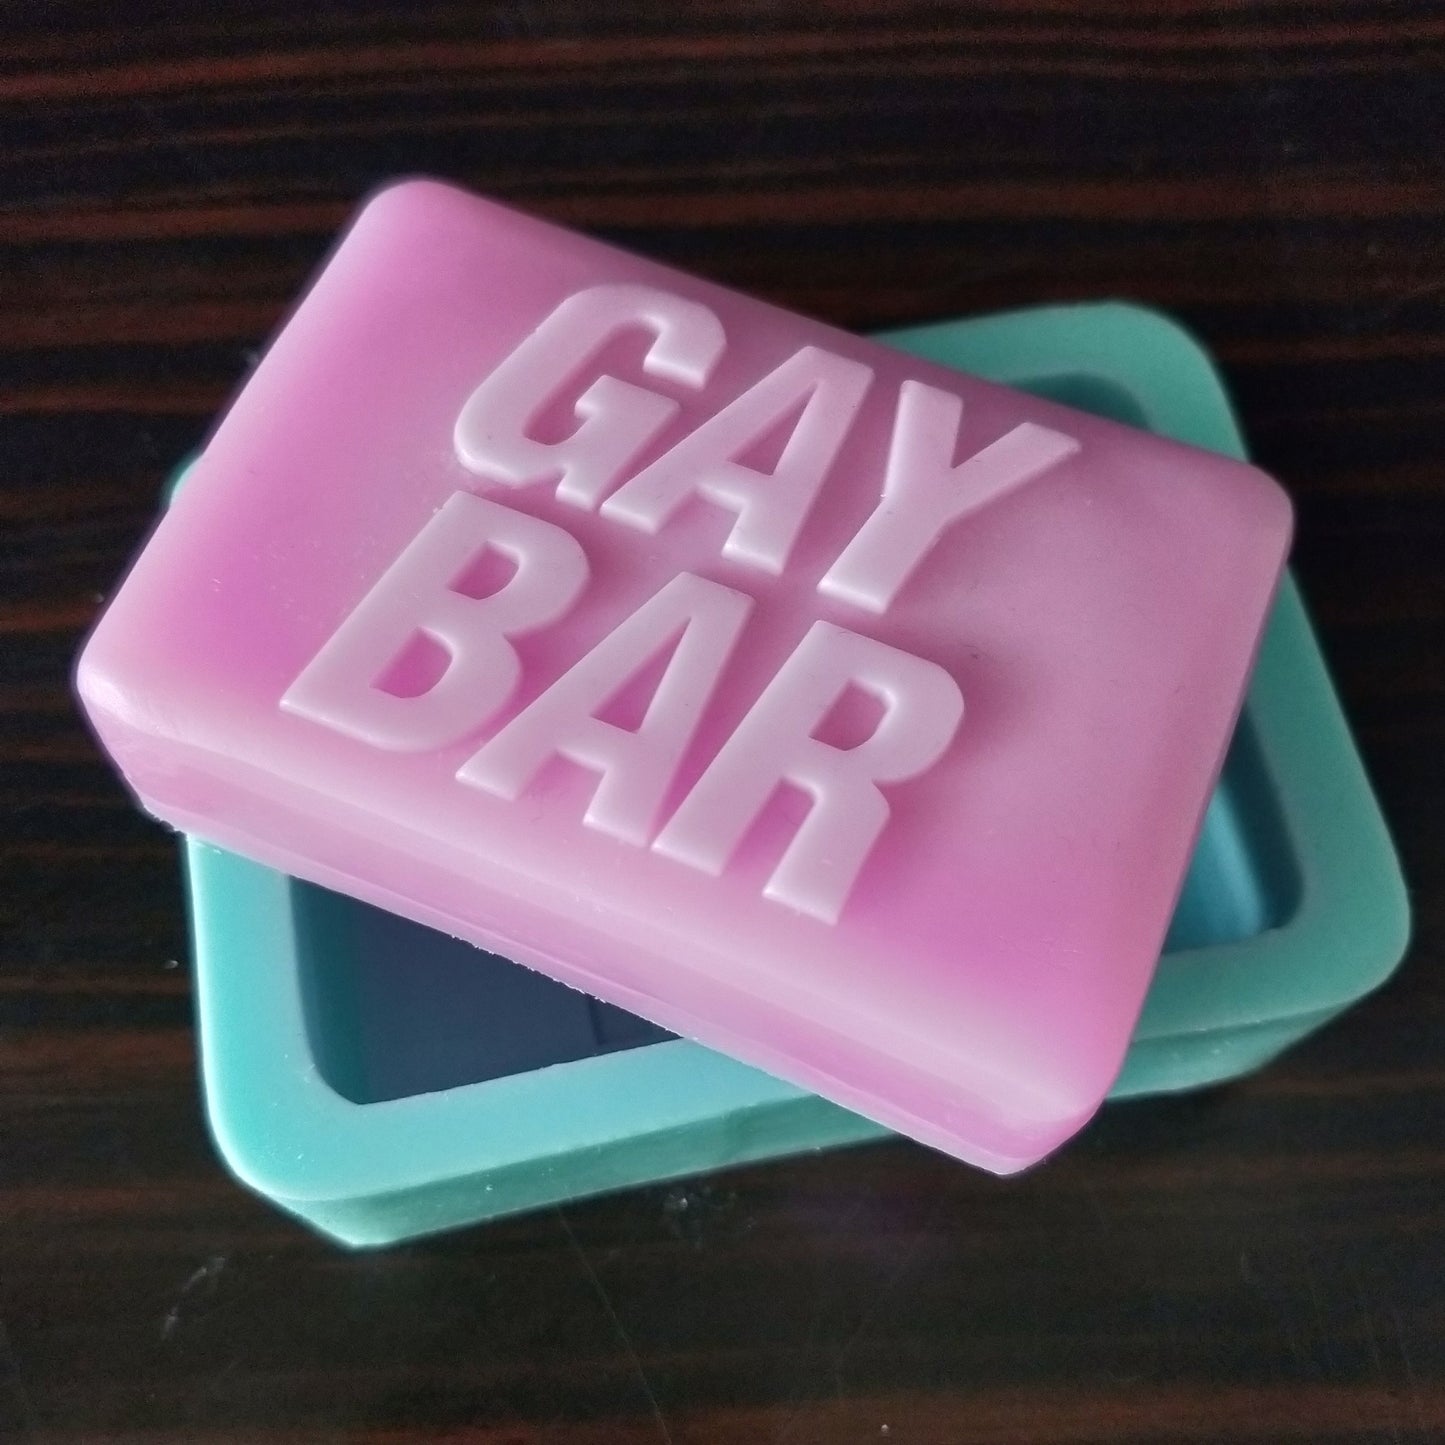 Gay Bar Silicone Soap Mold by White Market